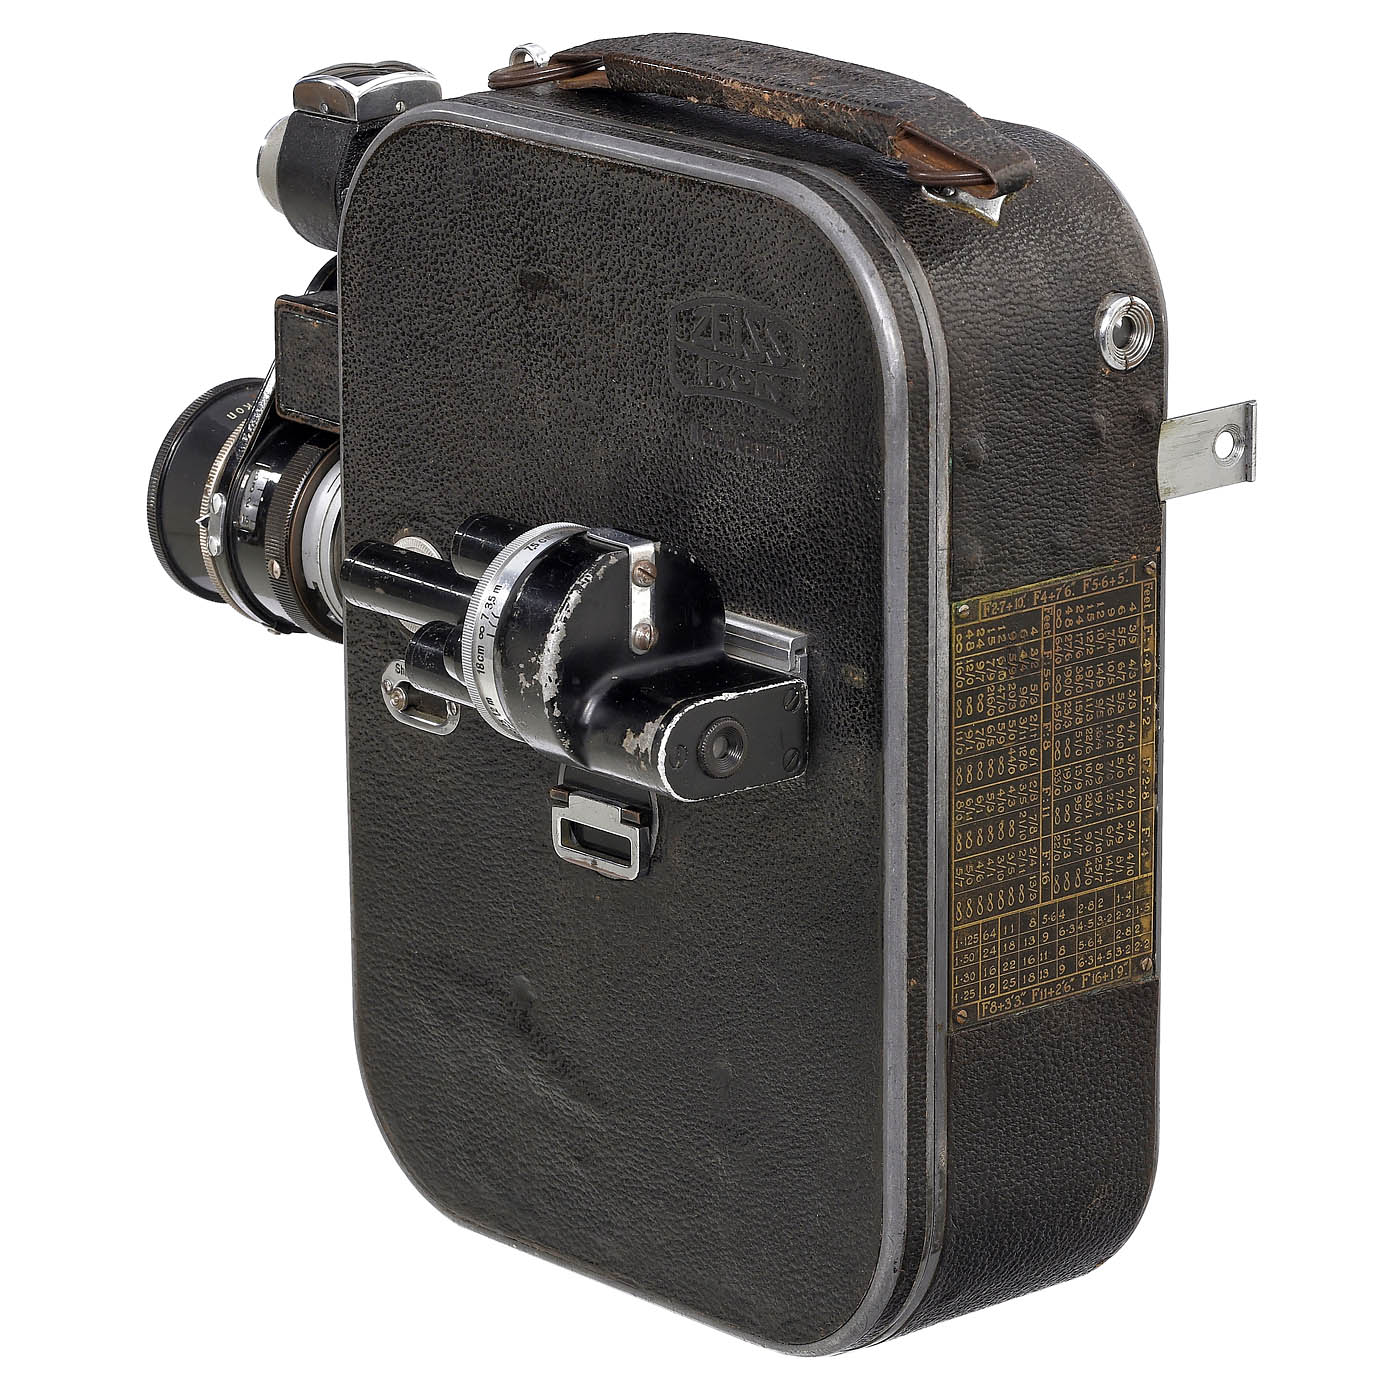 Movikon 16 Camera Outfit, c. 1934 - Image 5 of 5